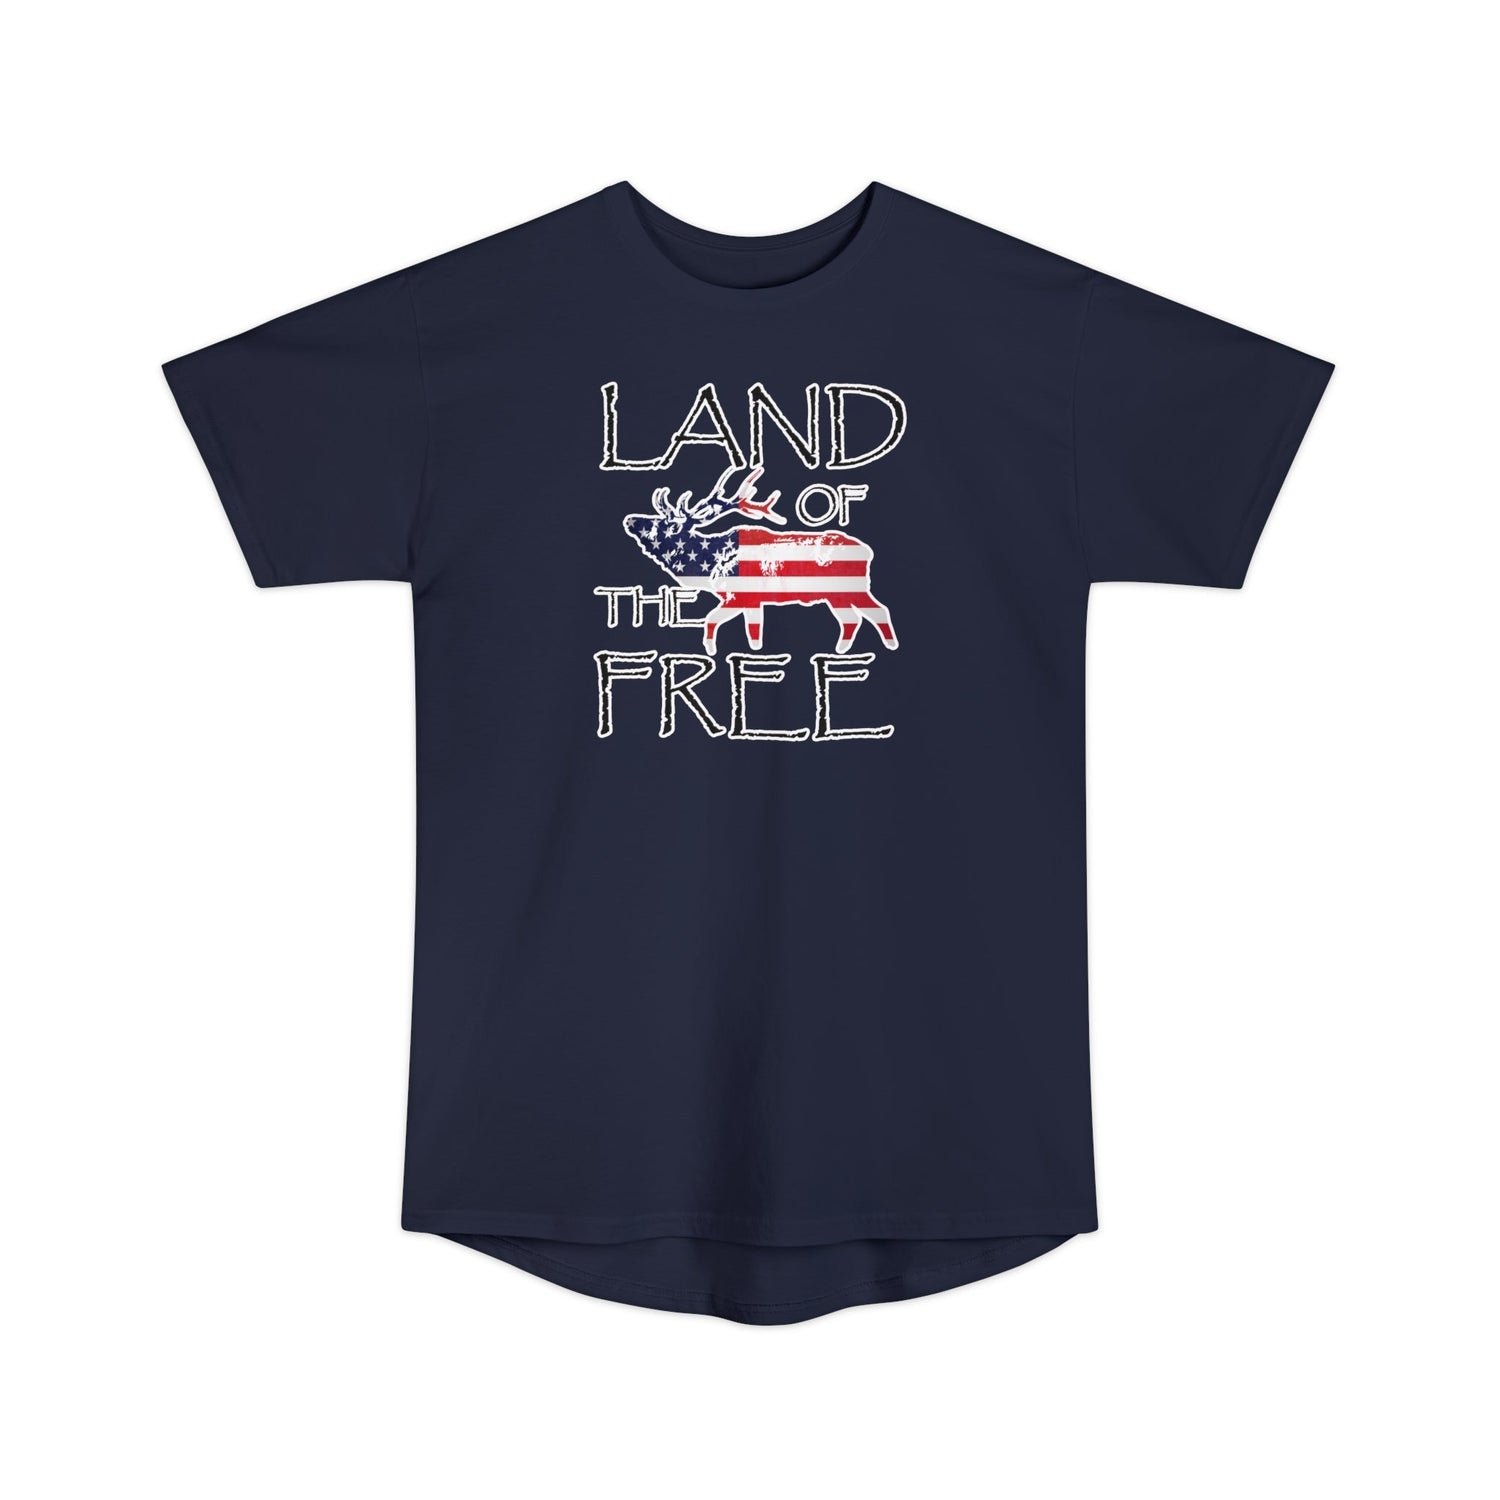 Athletic tall patriotic elk hunting t-shirt, color navy, front design placement